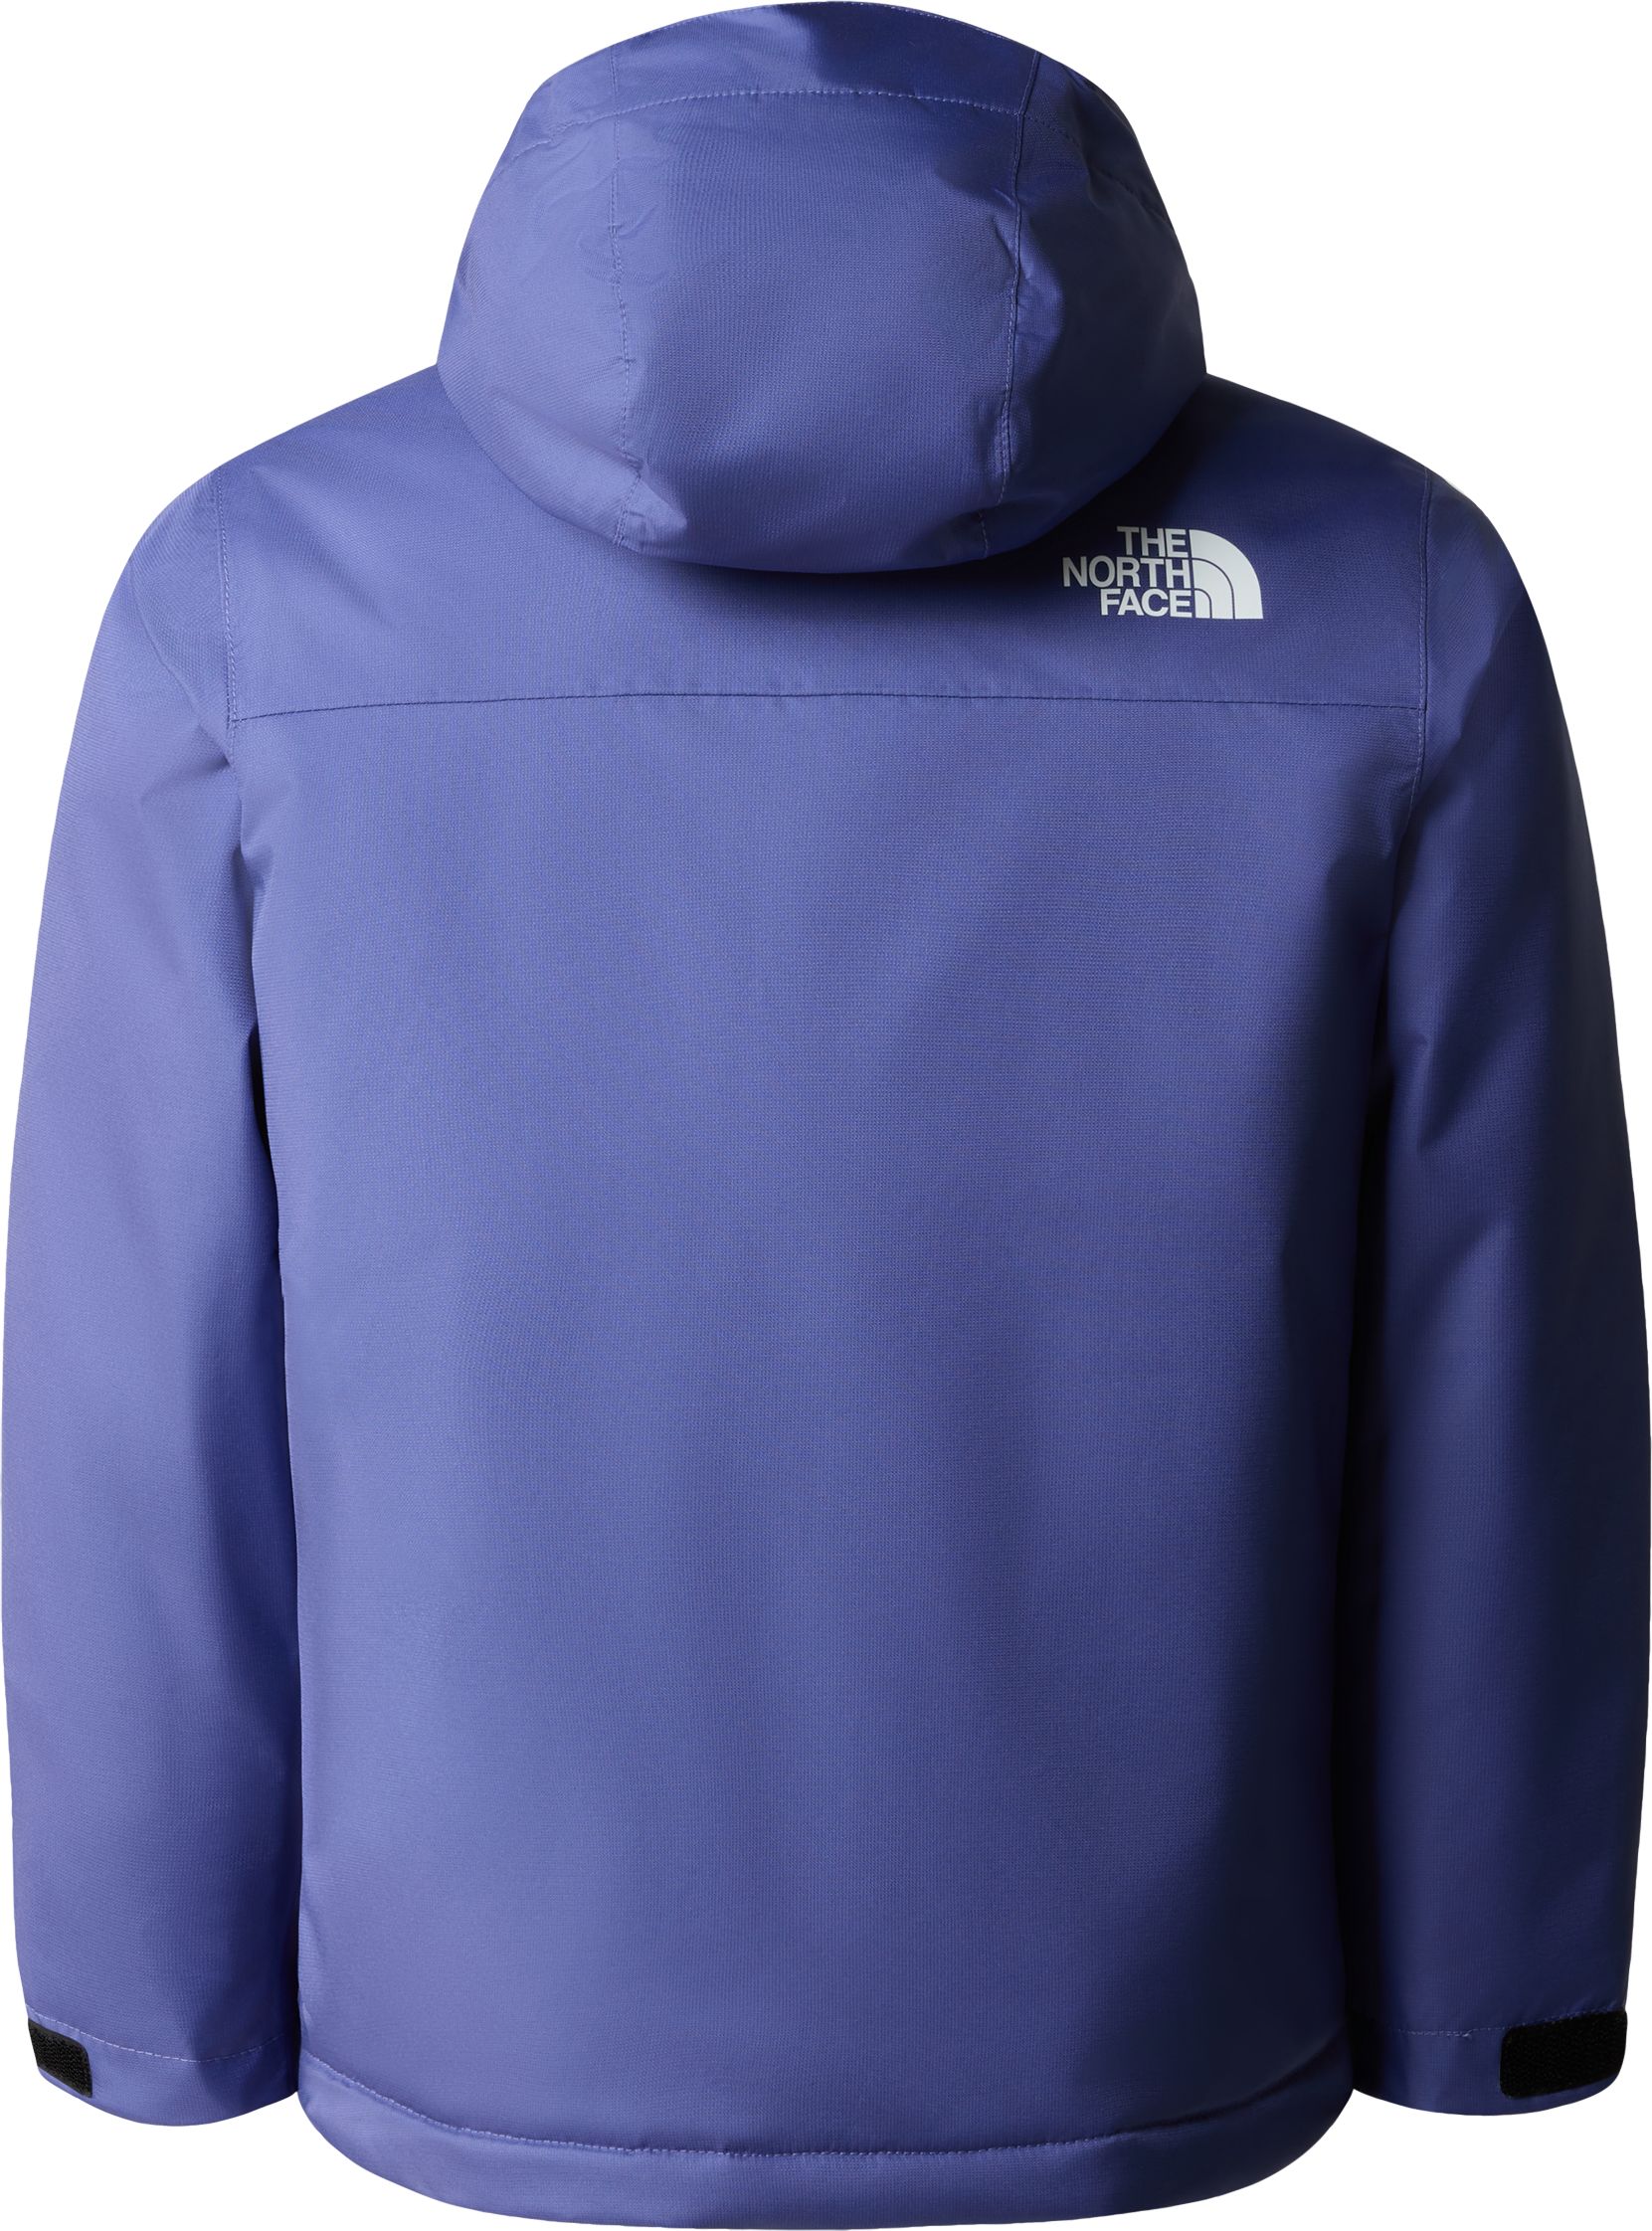 THE NORTH FACE, J SNOWQUEST JACKET